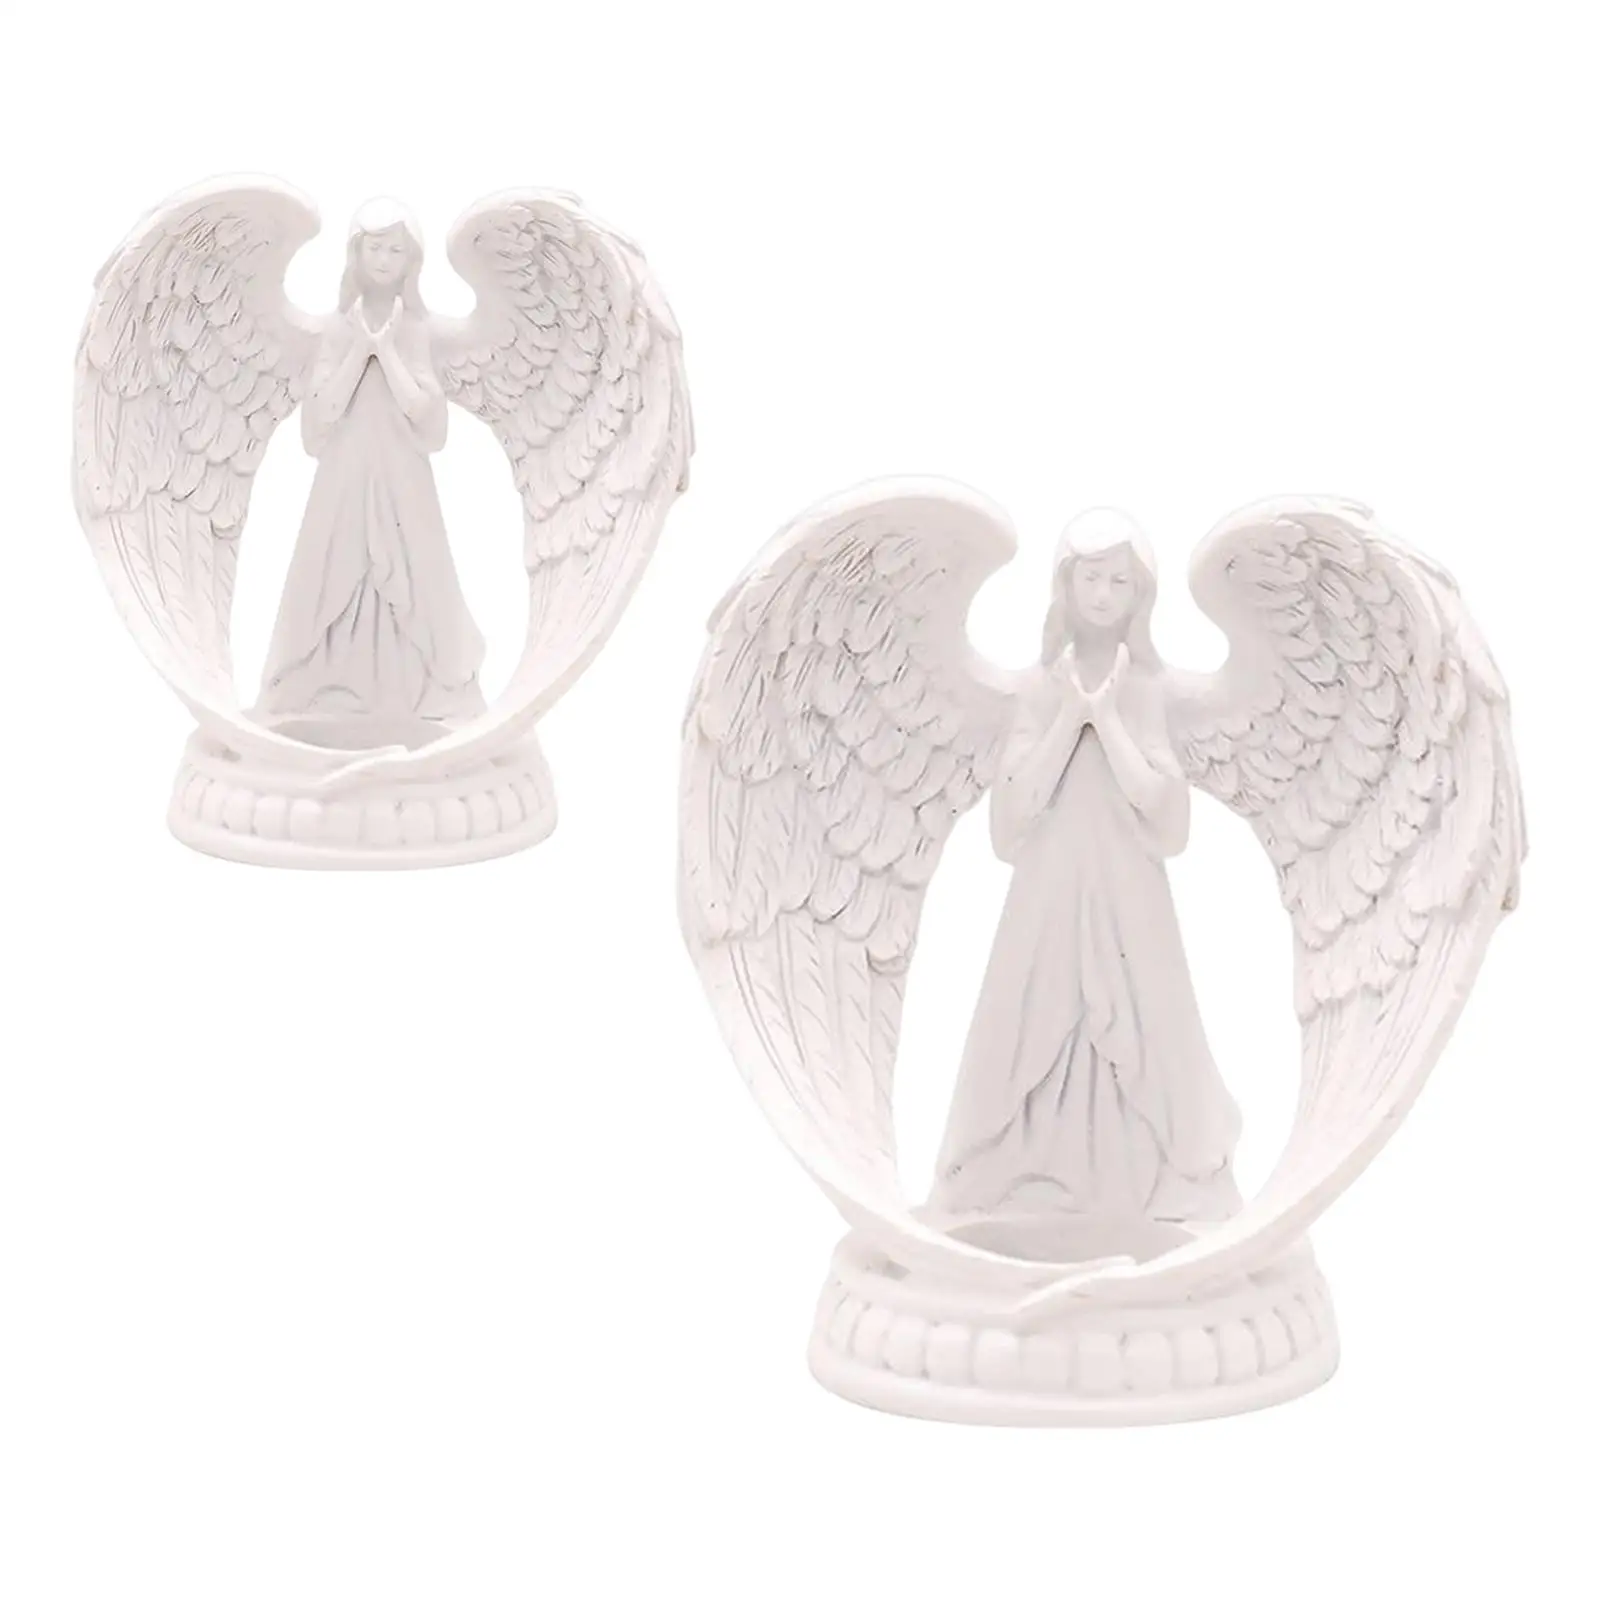 Resin Angel Statue Candle Holder Angel Candlestick Decorative Angel Figurine Votive Candle Holders for Wedding Anniversary Decor